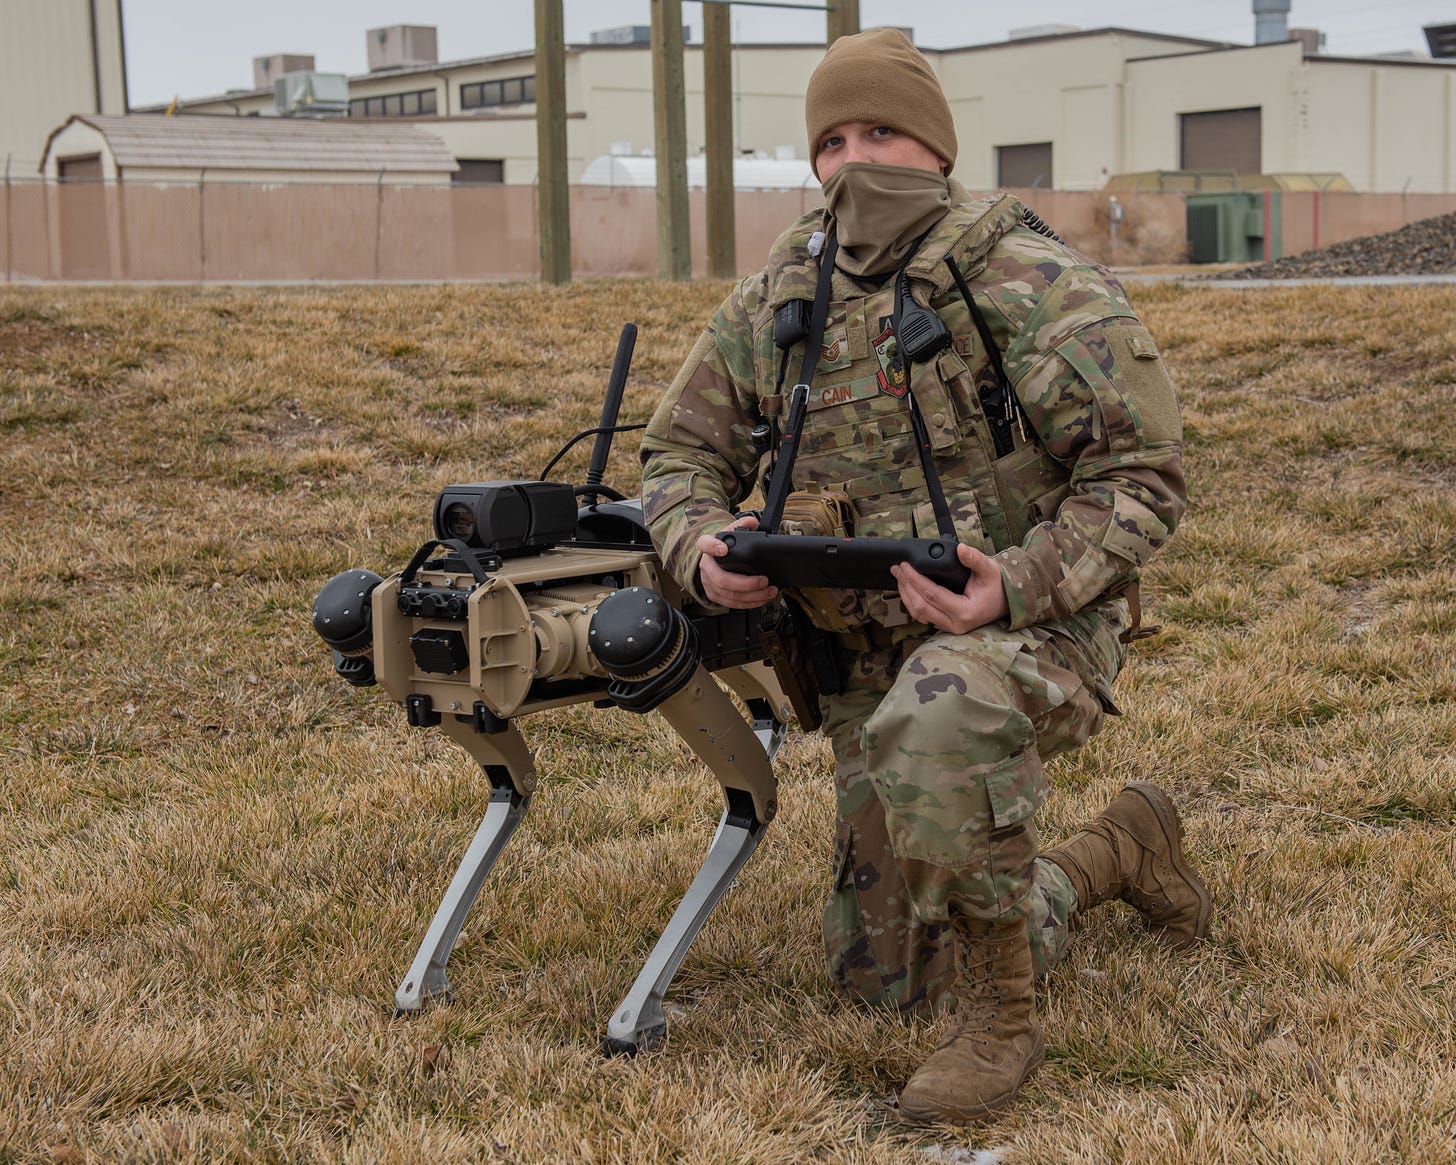 A human in inform poses next to a robot dog on a military base in Idaho.